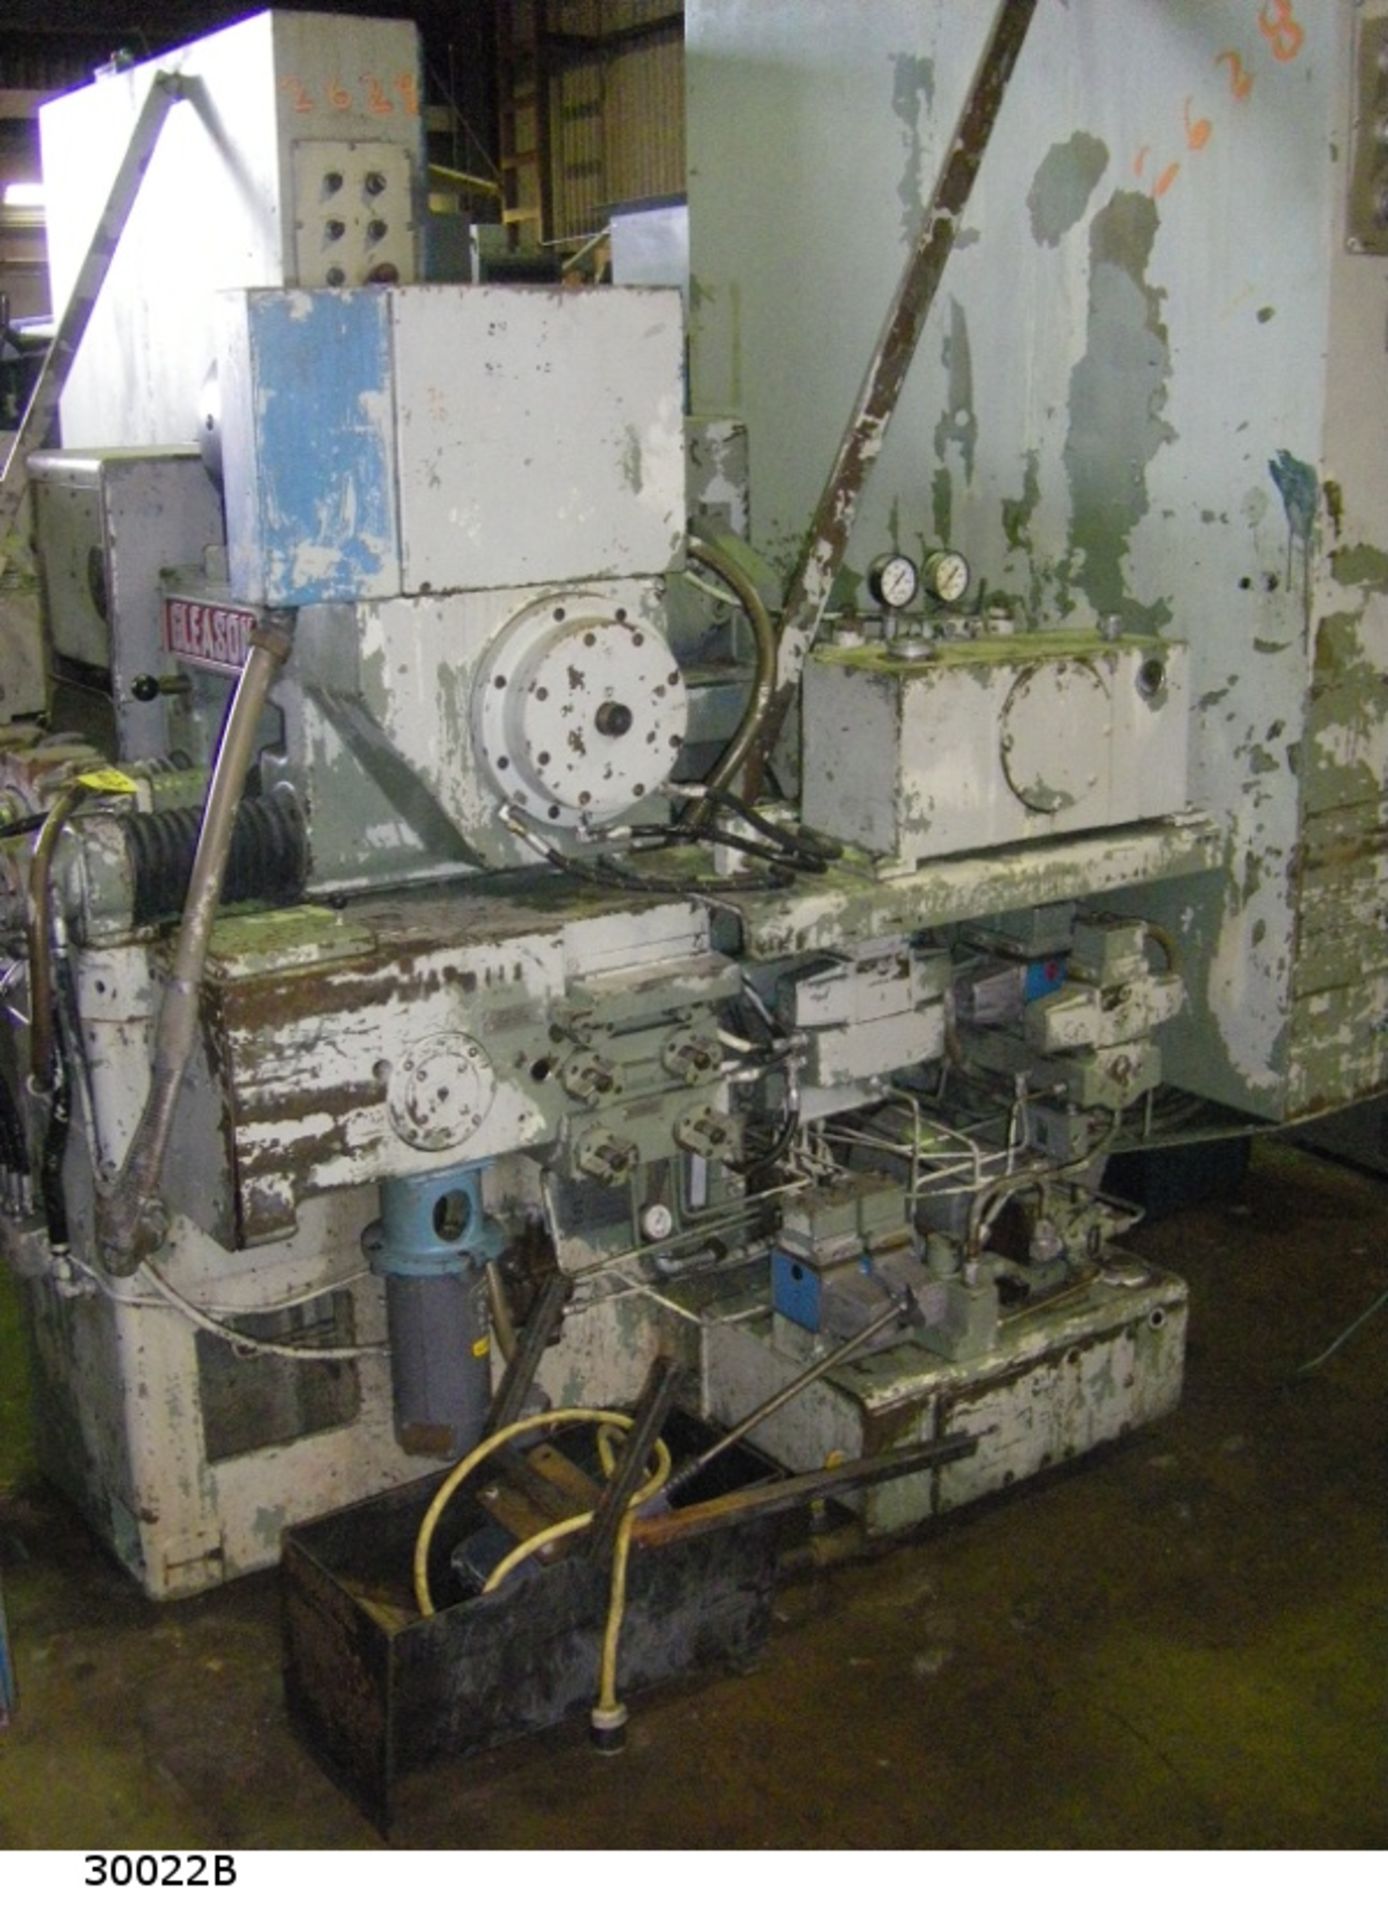 GLEASON 503 HYPOID GEAR LAPPING MACHINE. SERIAL NO. 639811, BUILT 1965 - Image 2 of 5